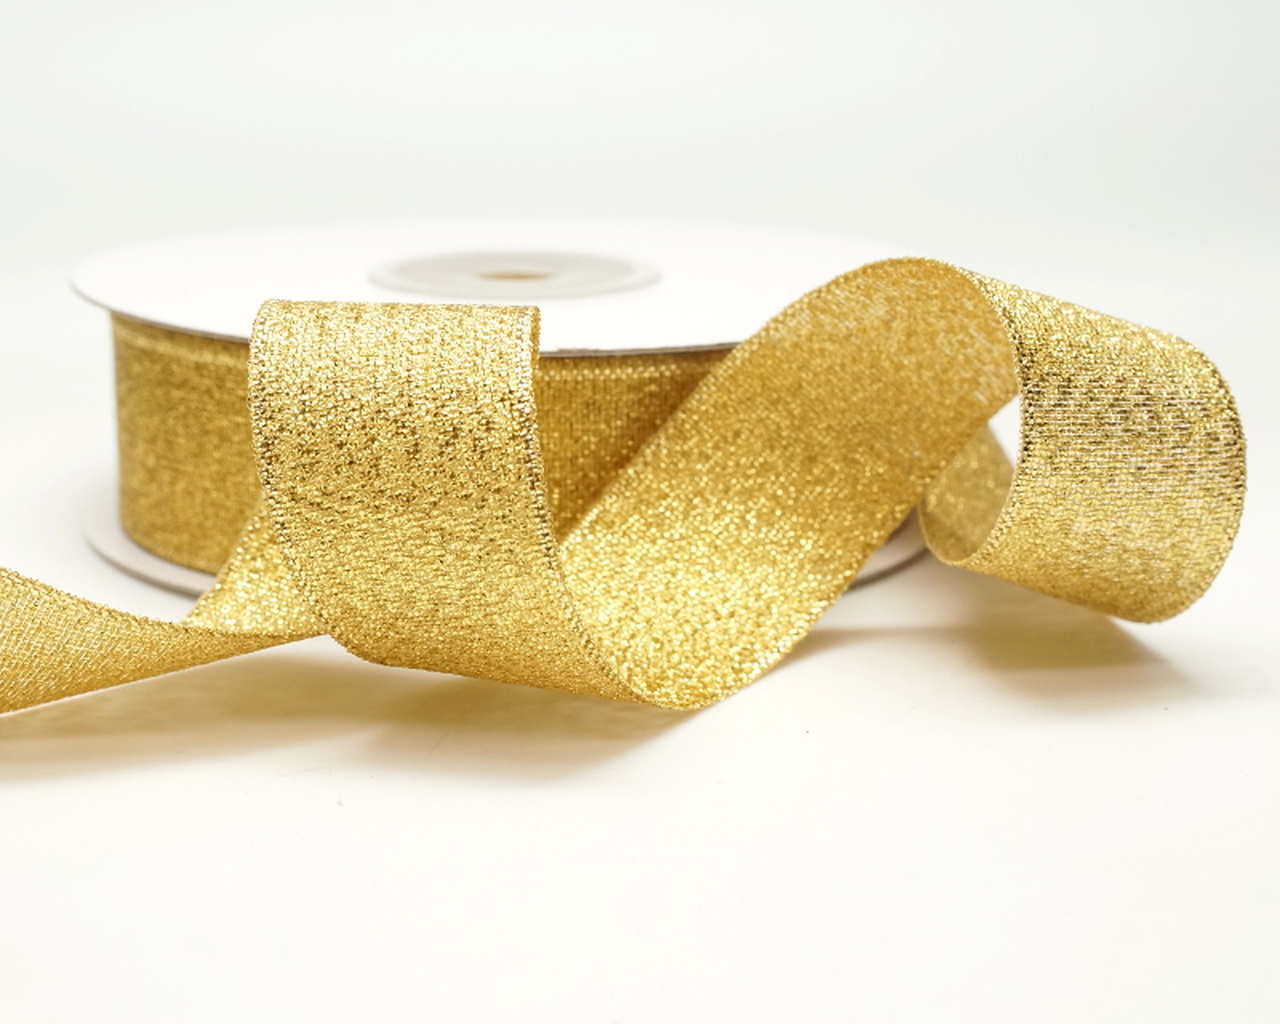 1.5 Inch (5 YDS) Wired Christmas Ribbon Gold w/Gold Trim Gift Wrap